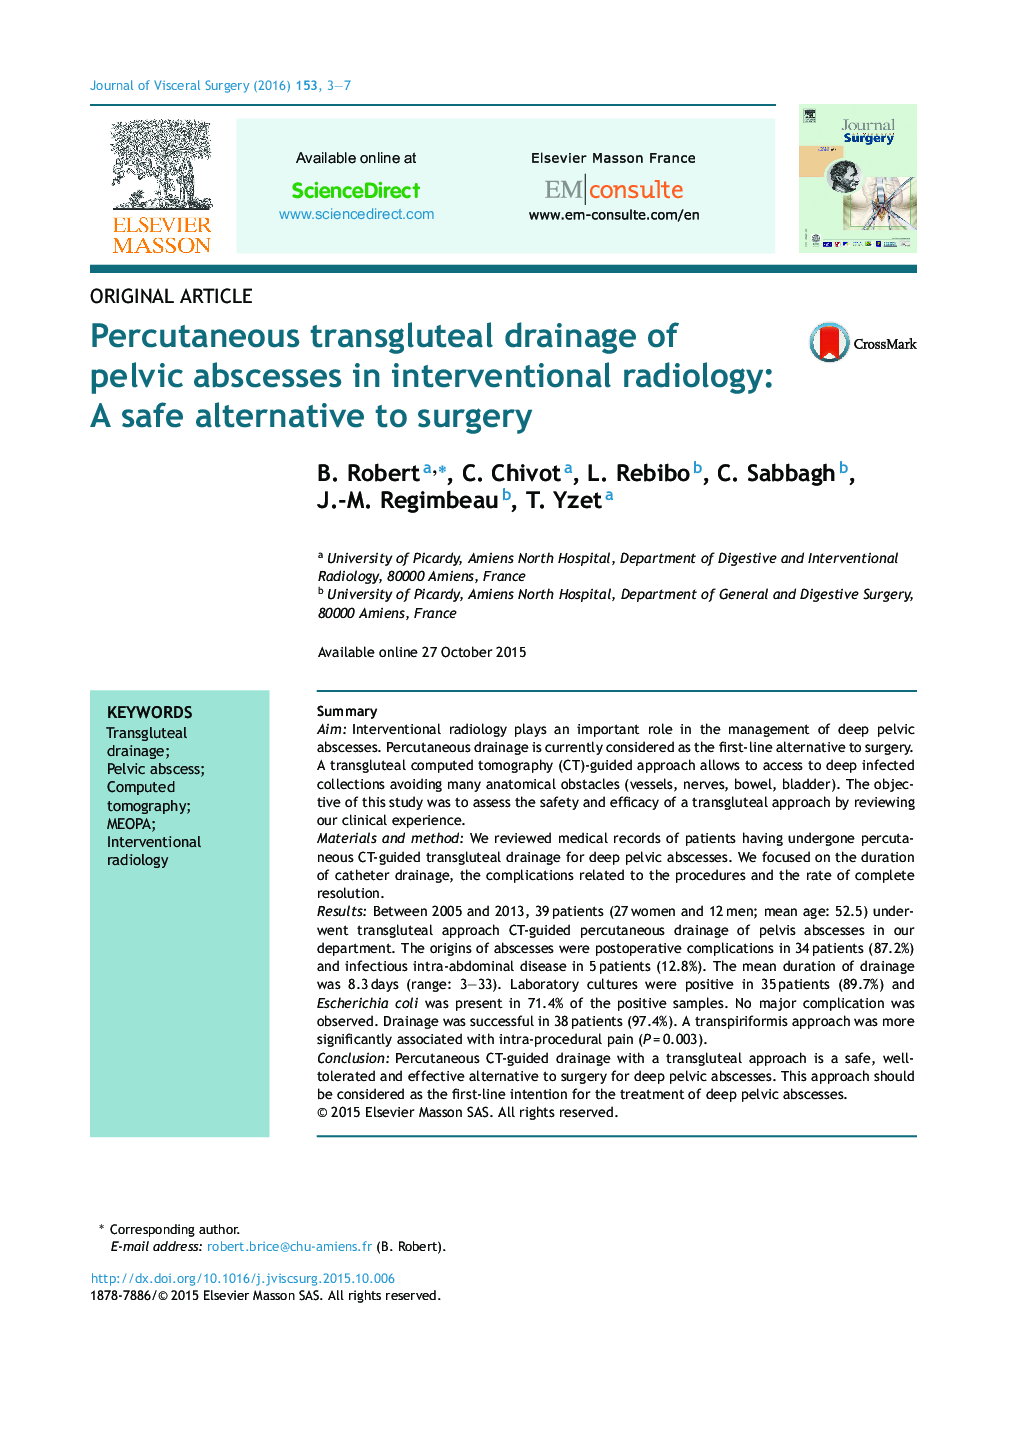 Percutaneous transgluteal drainage of pelvic abscesses in interventional radiology: A safe alternative to surgery